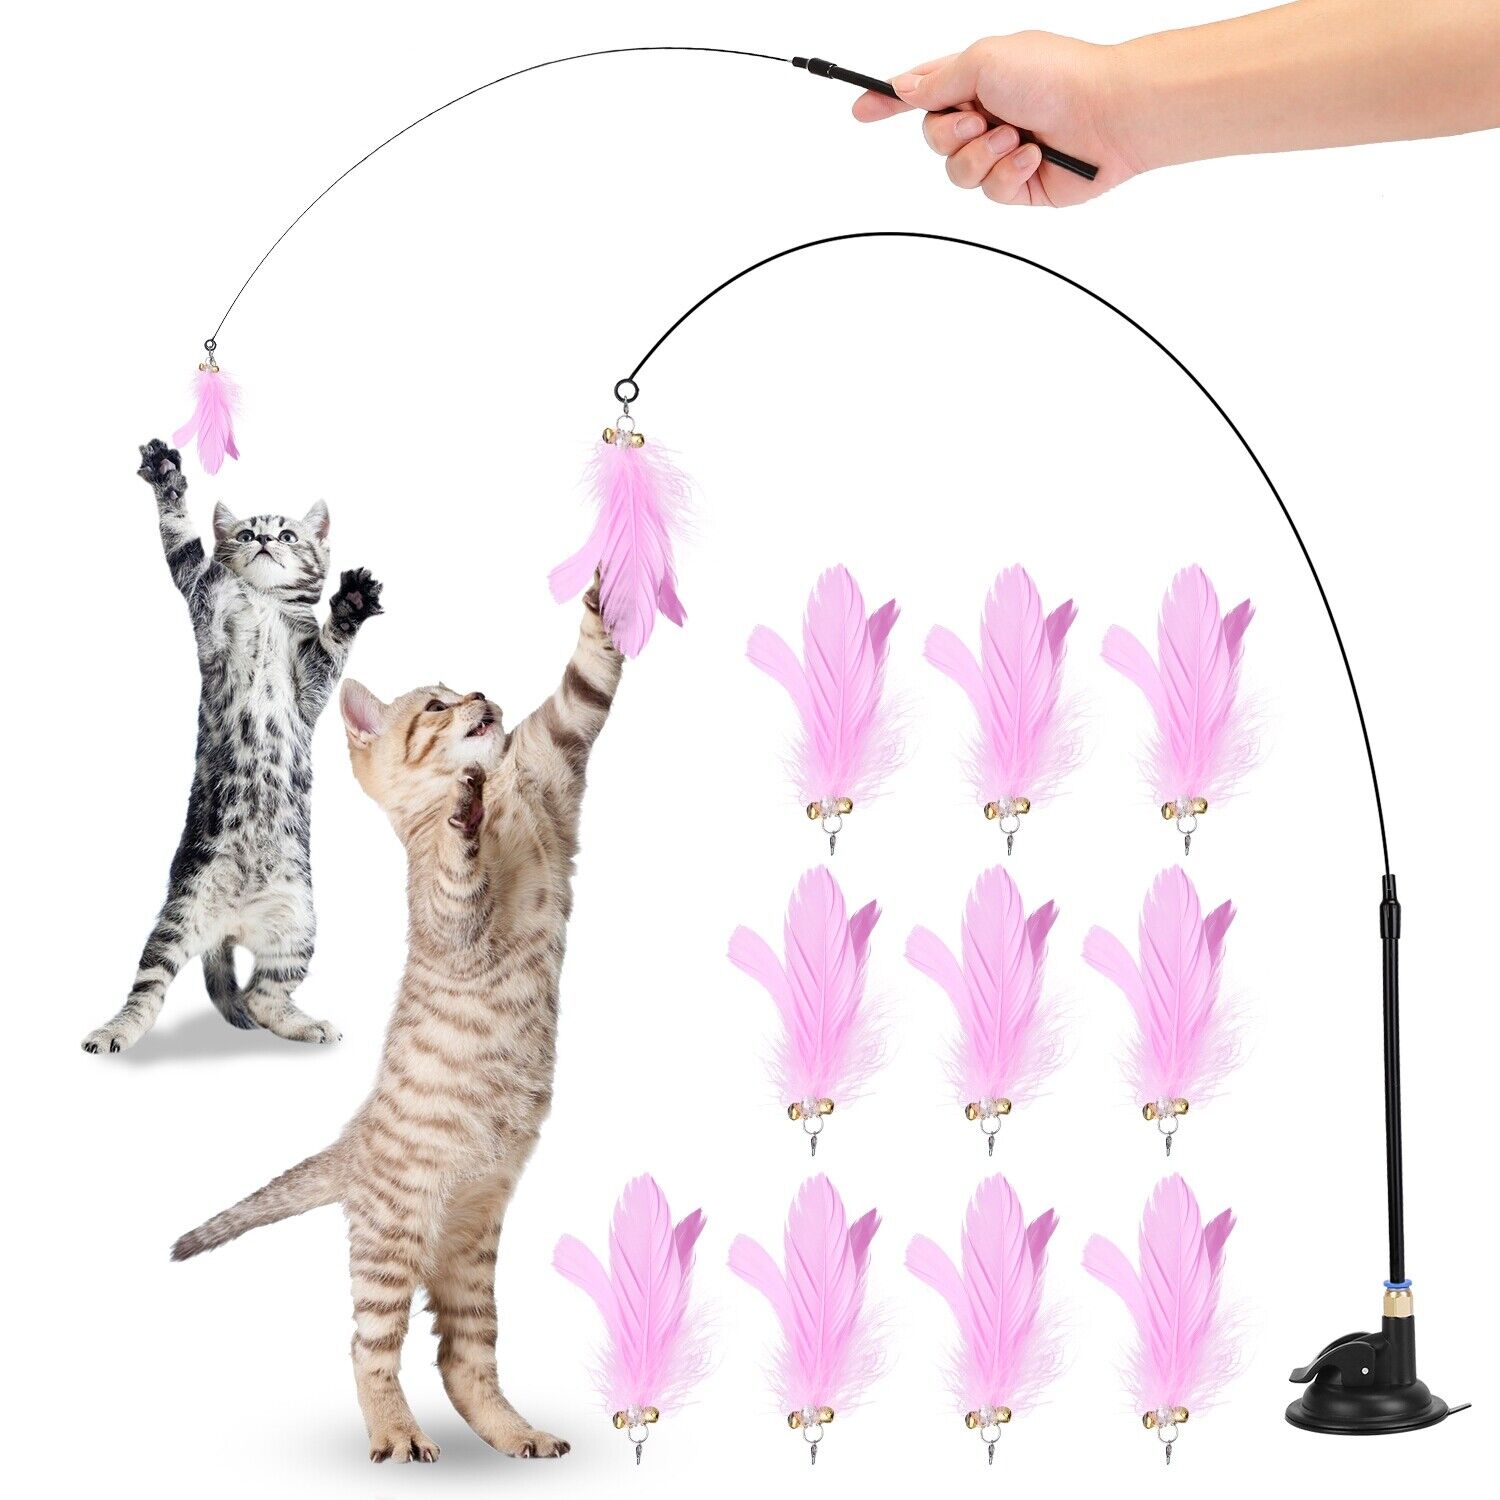 Pet Cat Toys Feather Wand Rod Pet Kitty Bell Play Teaser Interactive Toy + Bell Unbranded Does not apply - фотография #12